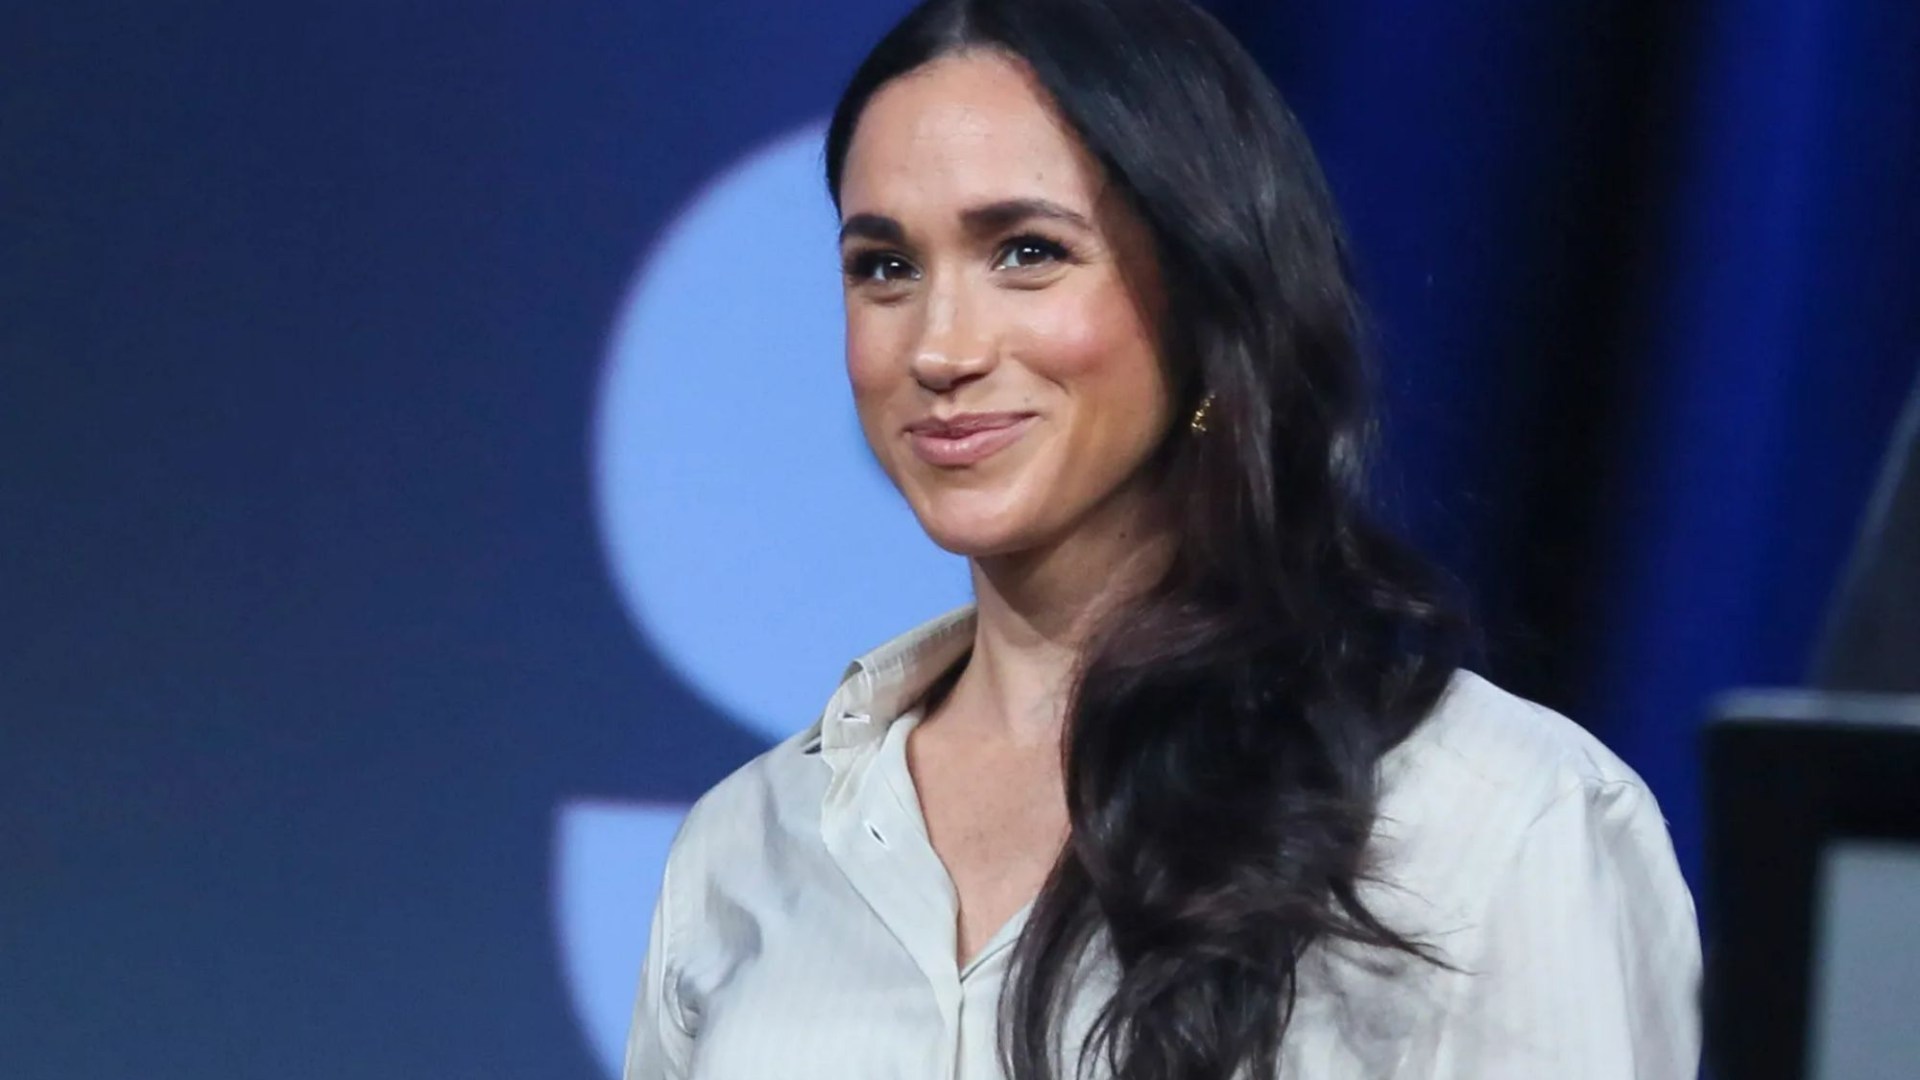 Meghan Markle is using Princess Dianas legacy to promote her new business – timing is no accident, royal expert says [Video]